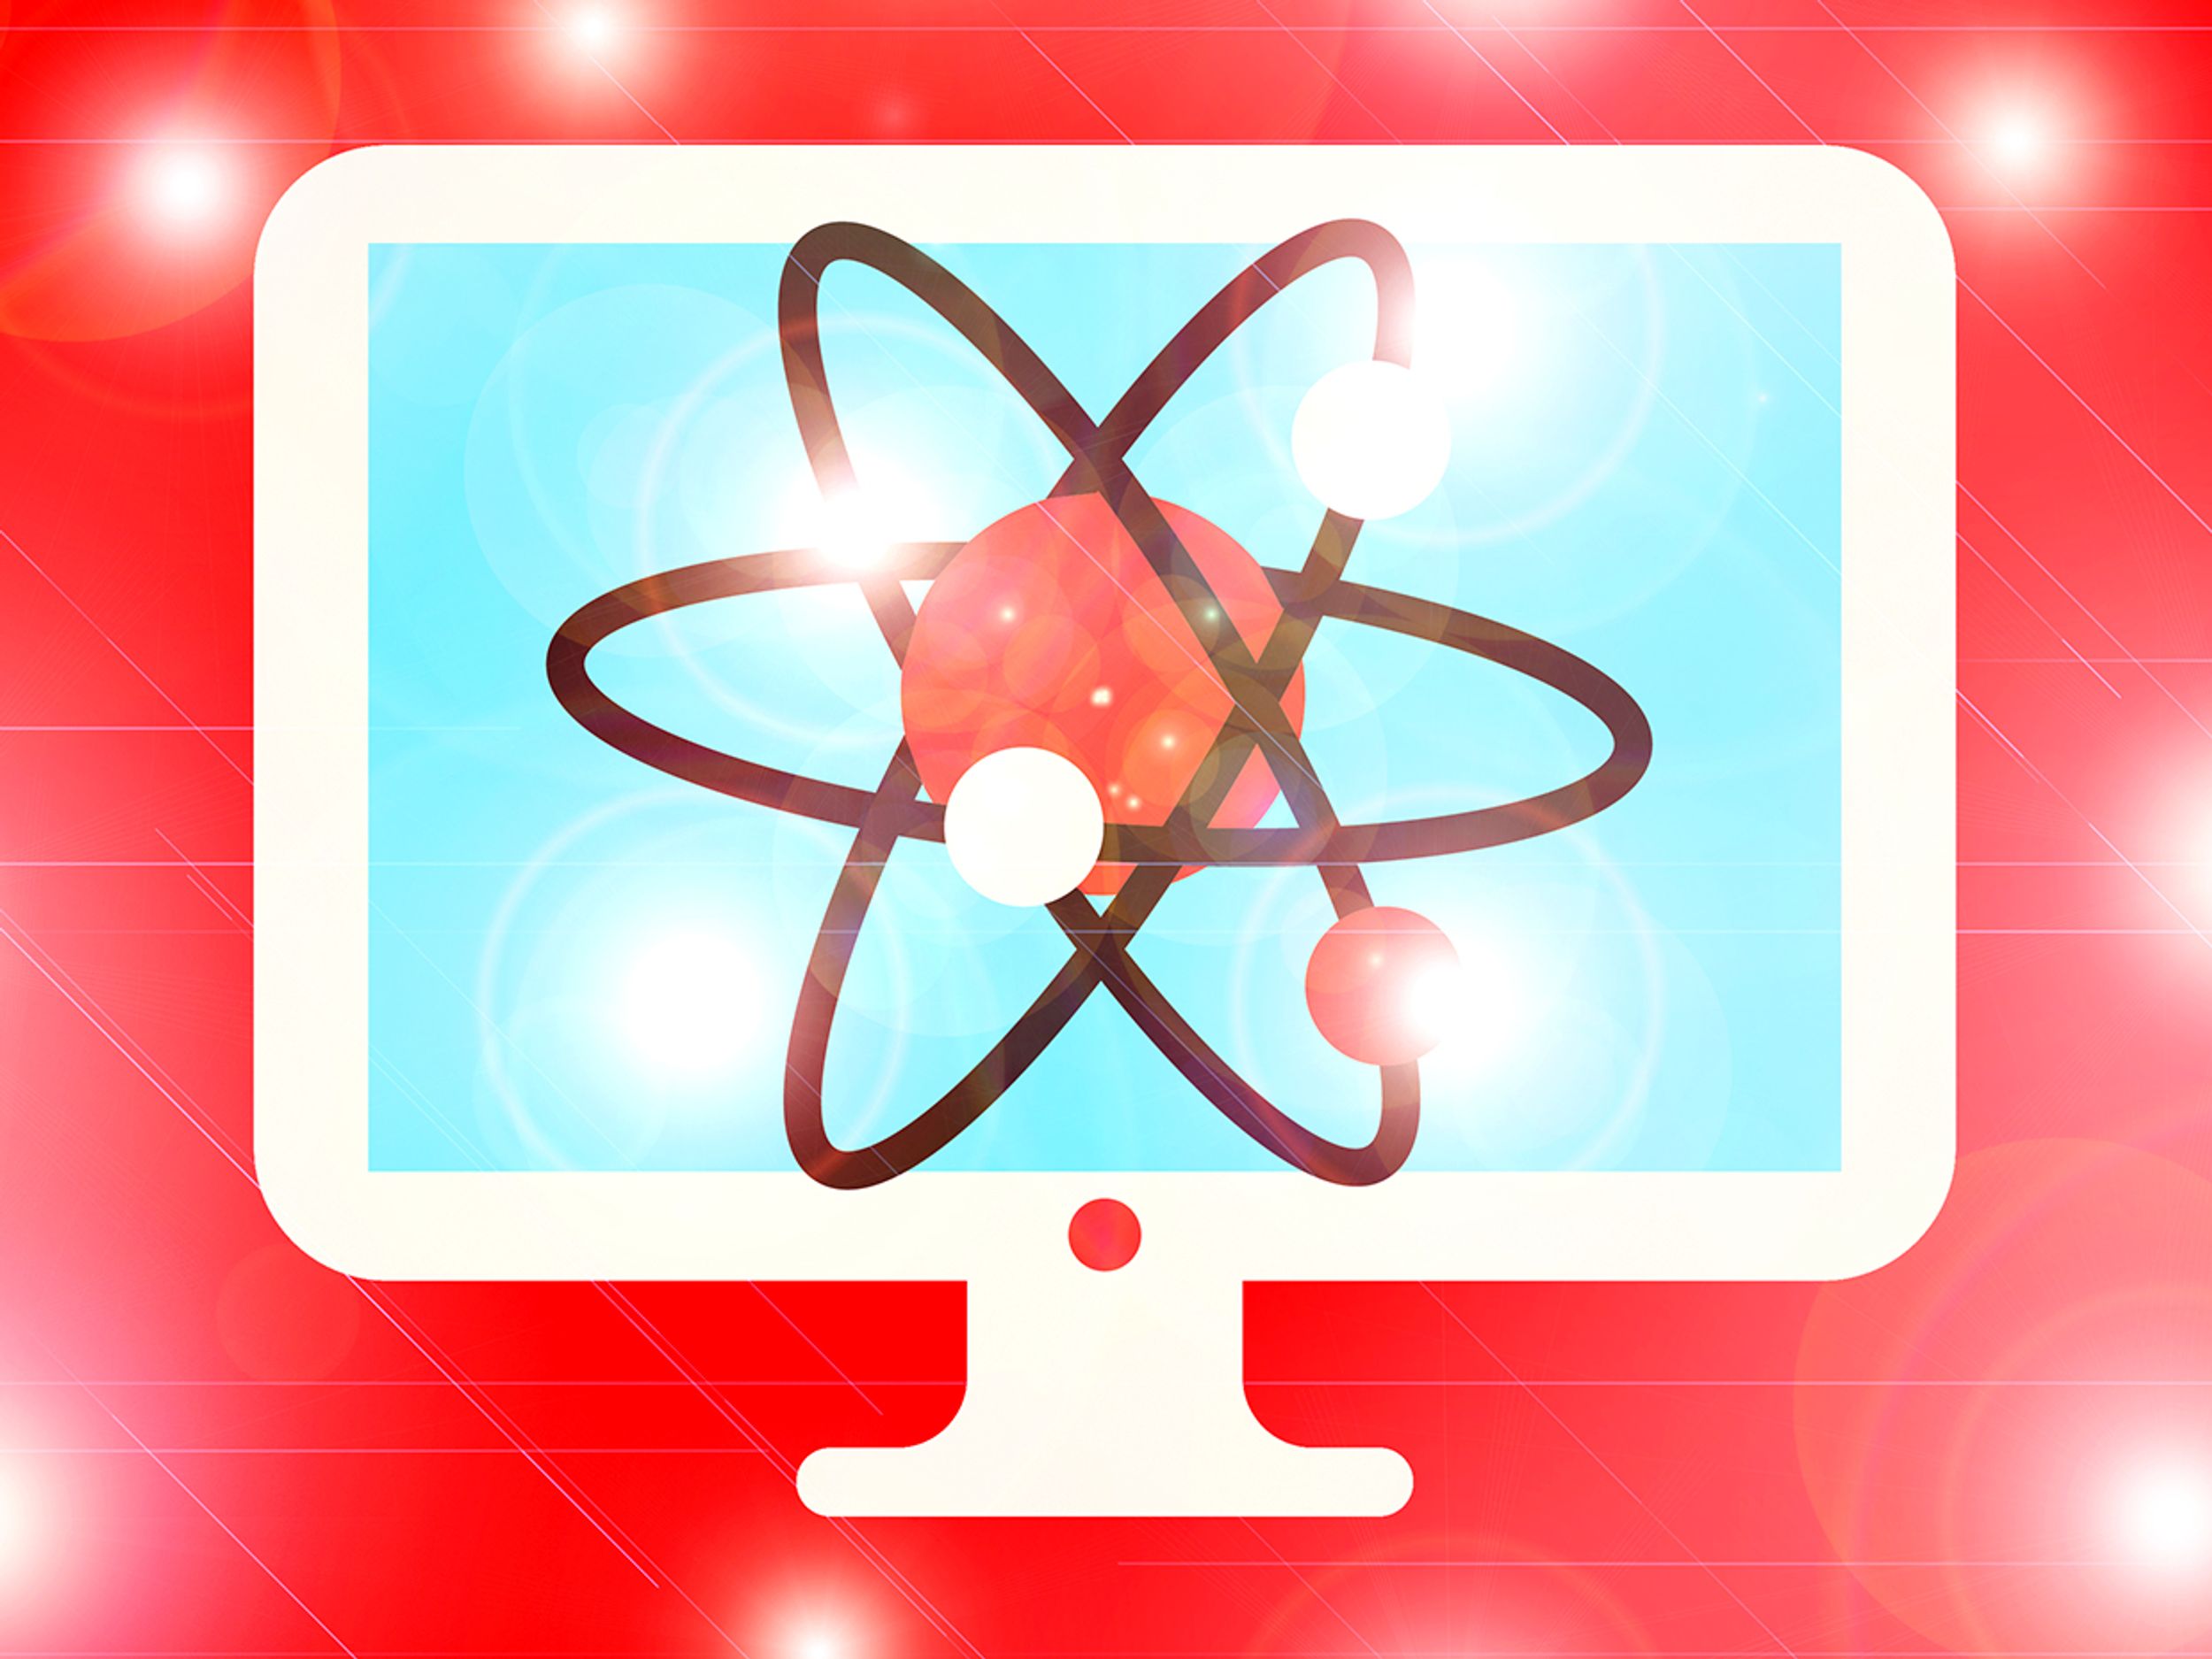 Illustration on a red background of a white and blue computer screen with an atomic symbol glowing on it.